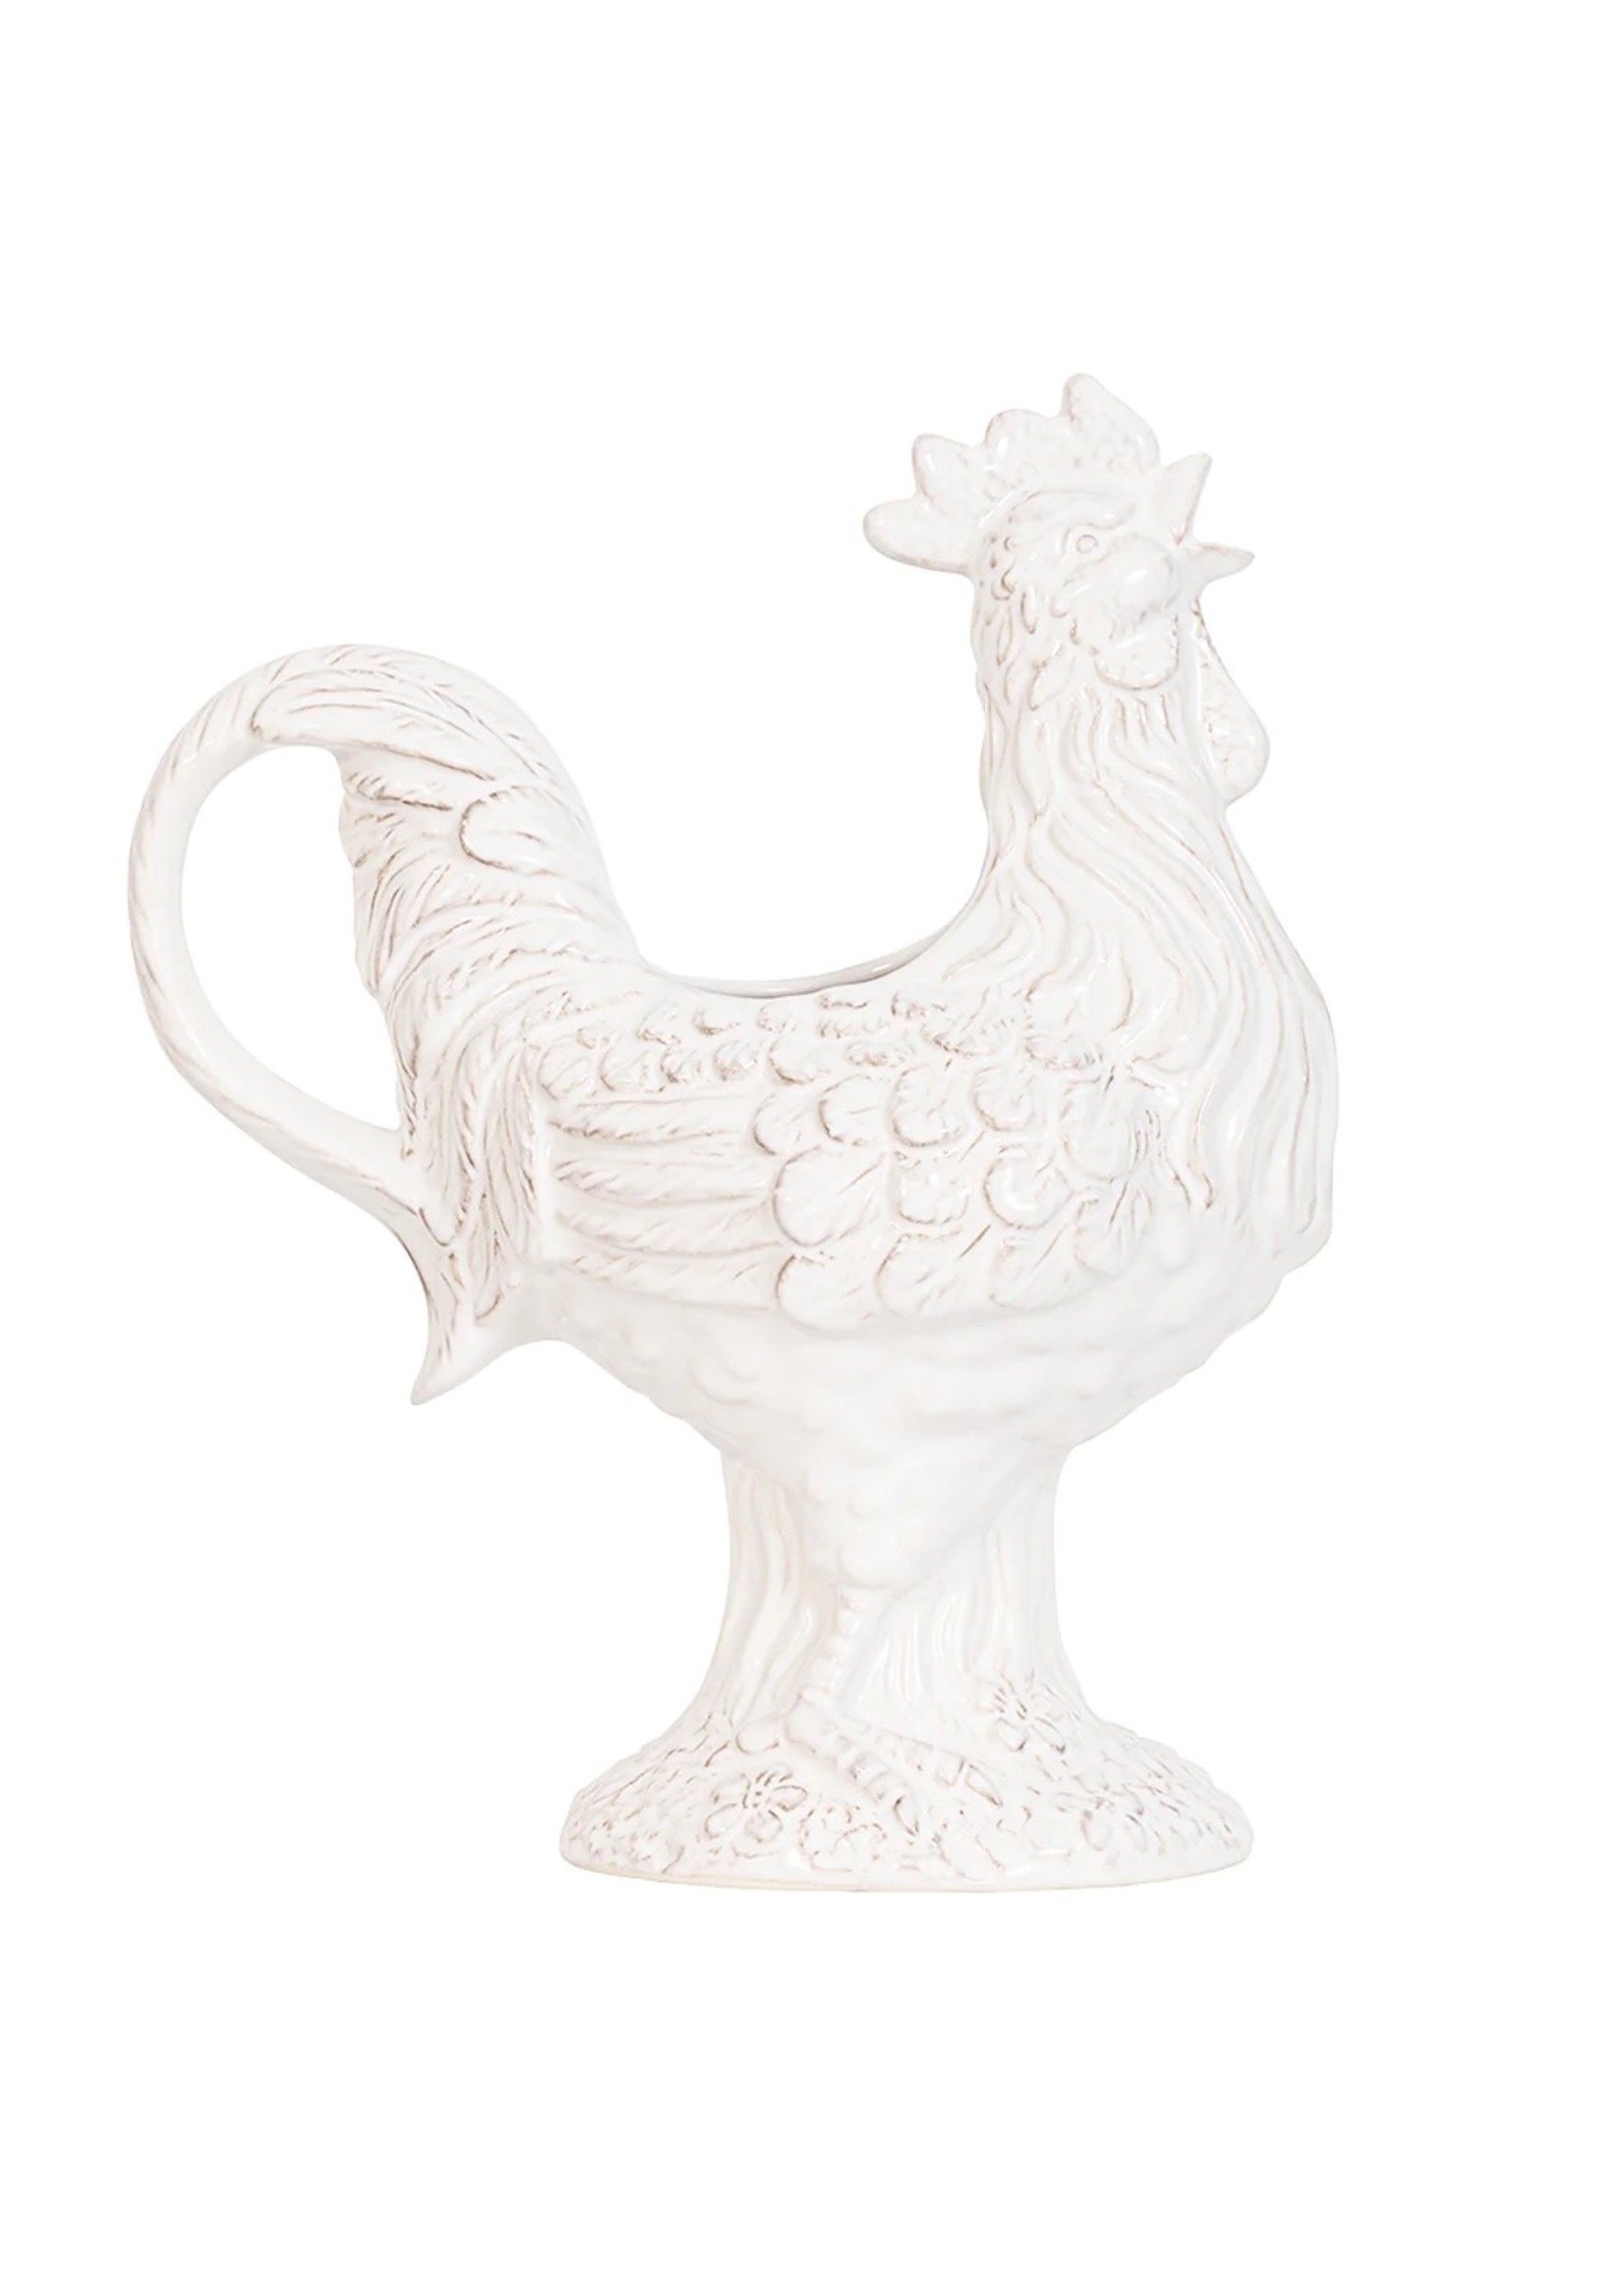 Juliska Clever Creatures - Rousseau the Rooster Pitcher